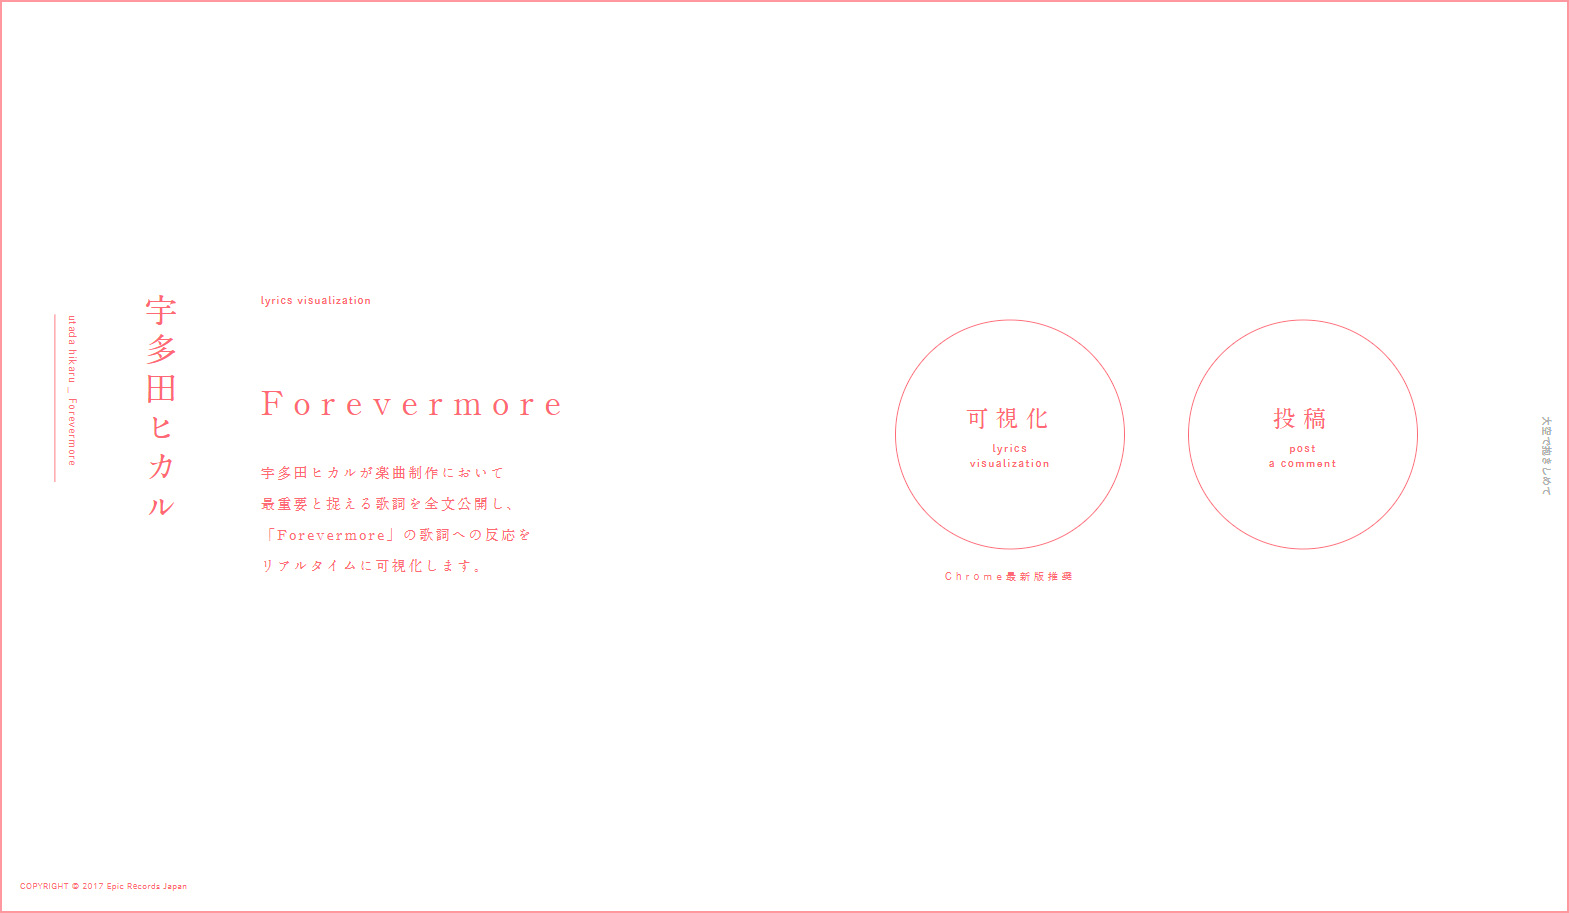 『Forevermore』歌詞サイト